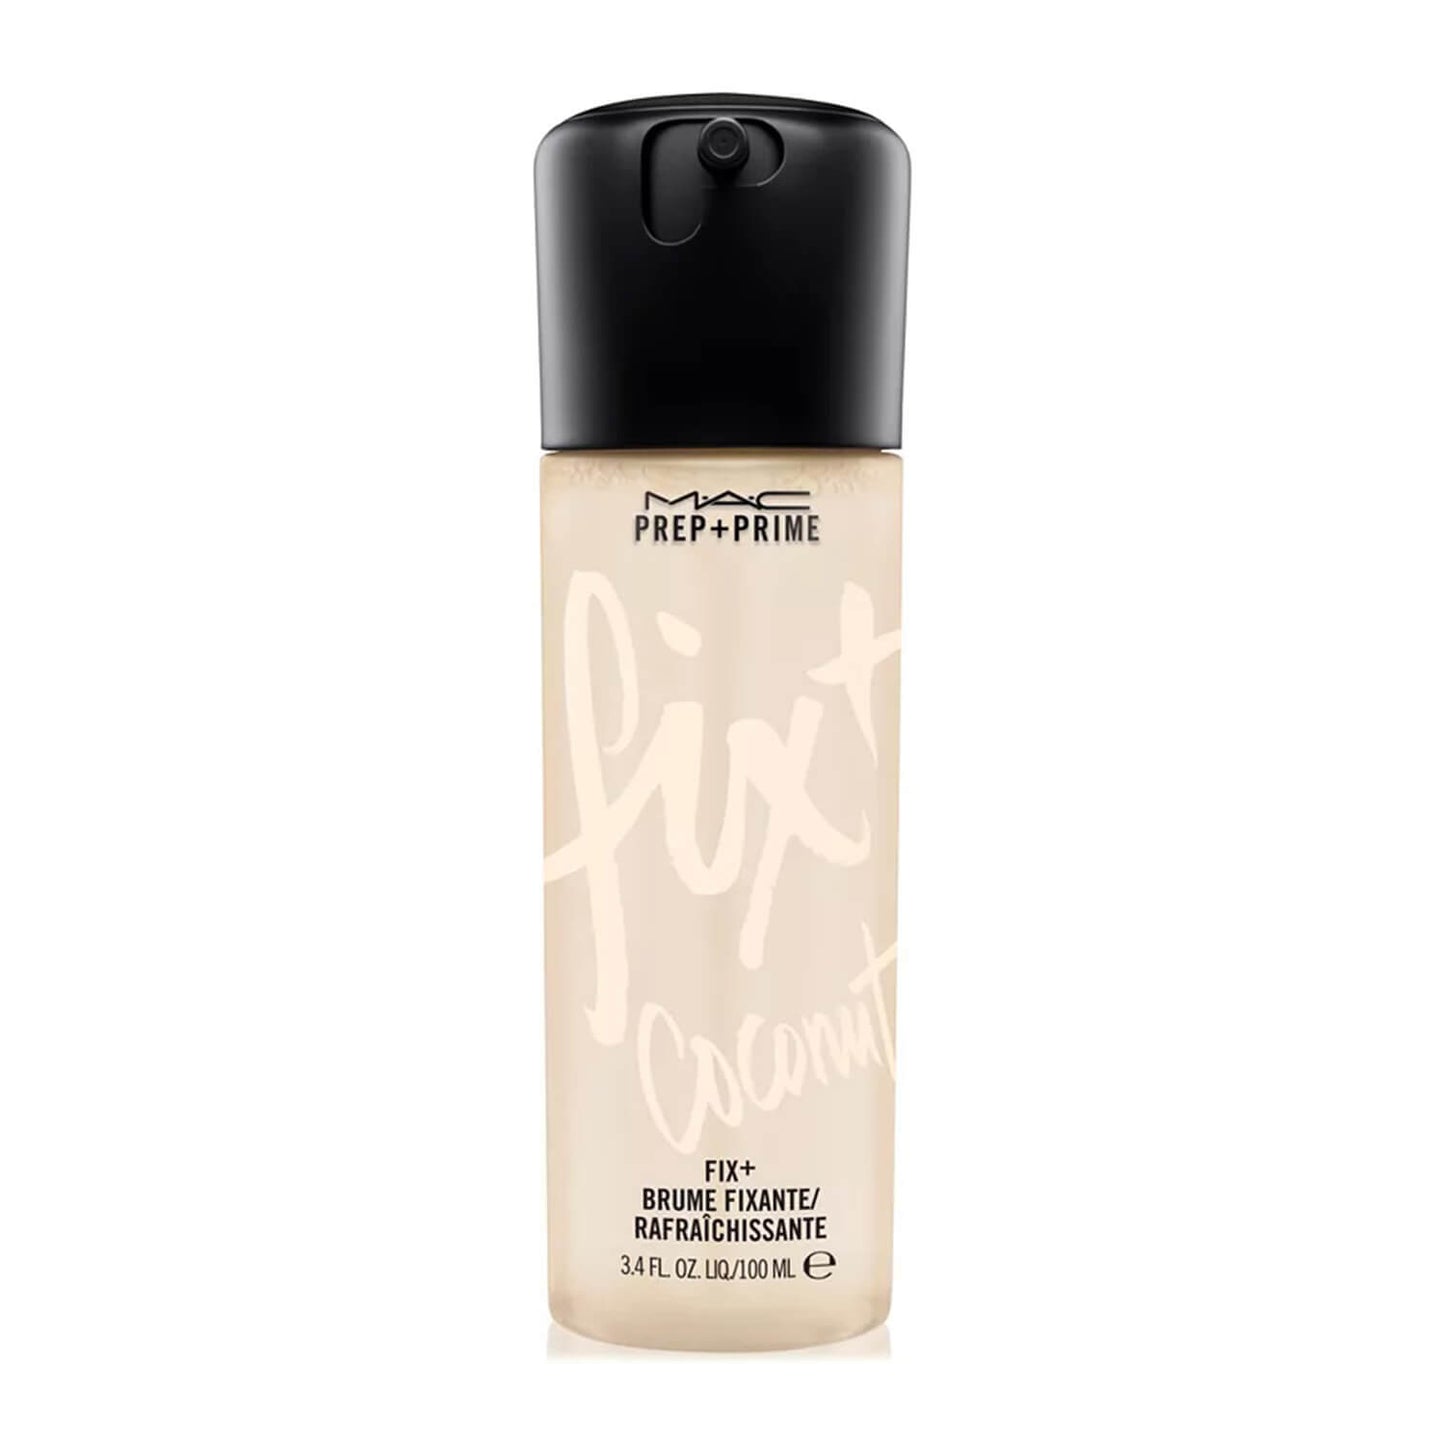 Shop Mac setting spray in coconut available at Heygirl.pk for delivery in Karachi lahore islamabad pakistan